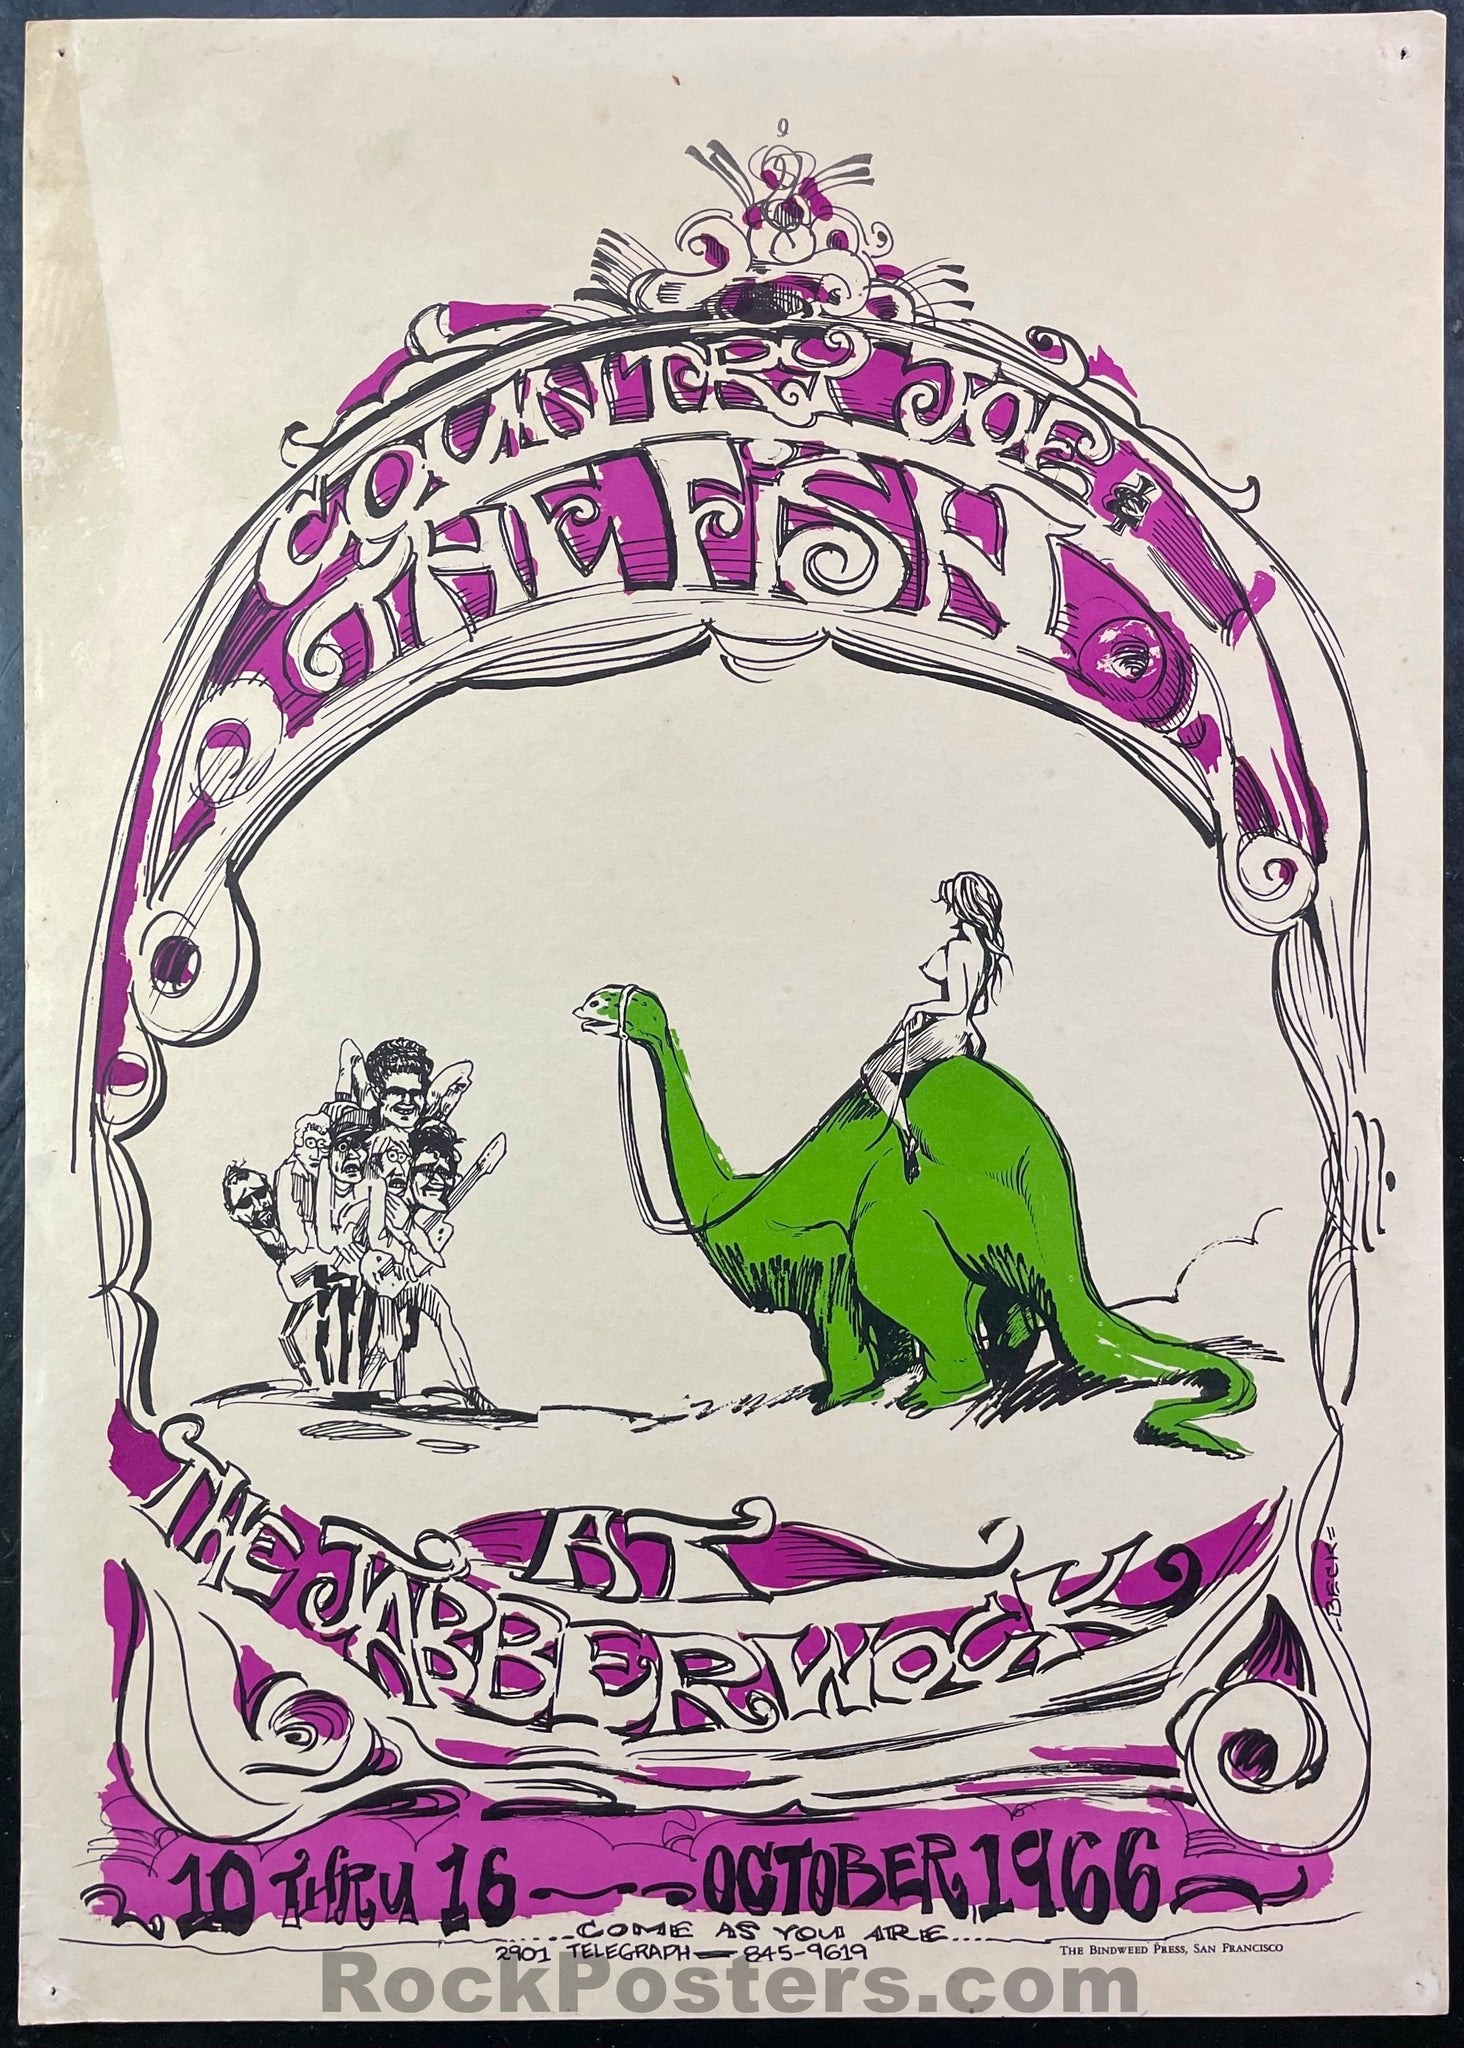 AUCTION - AOR 2.282 - Country Joe and the Fish - 1966 Poster - Jabberwock Berkeley - Excellent